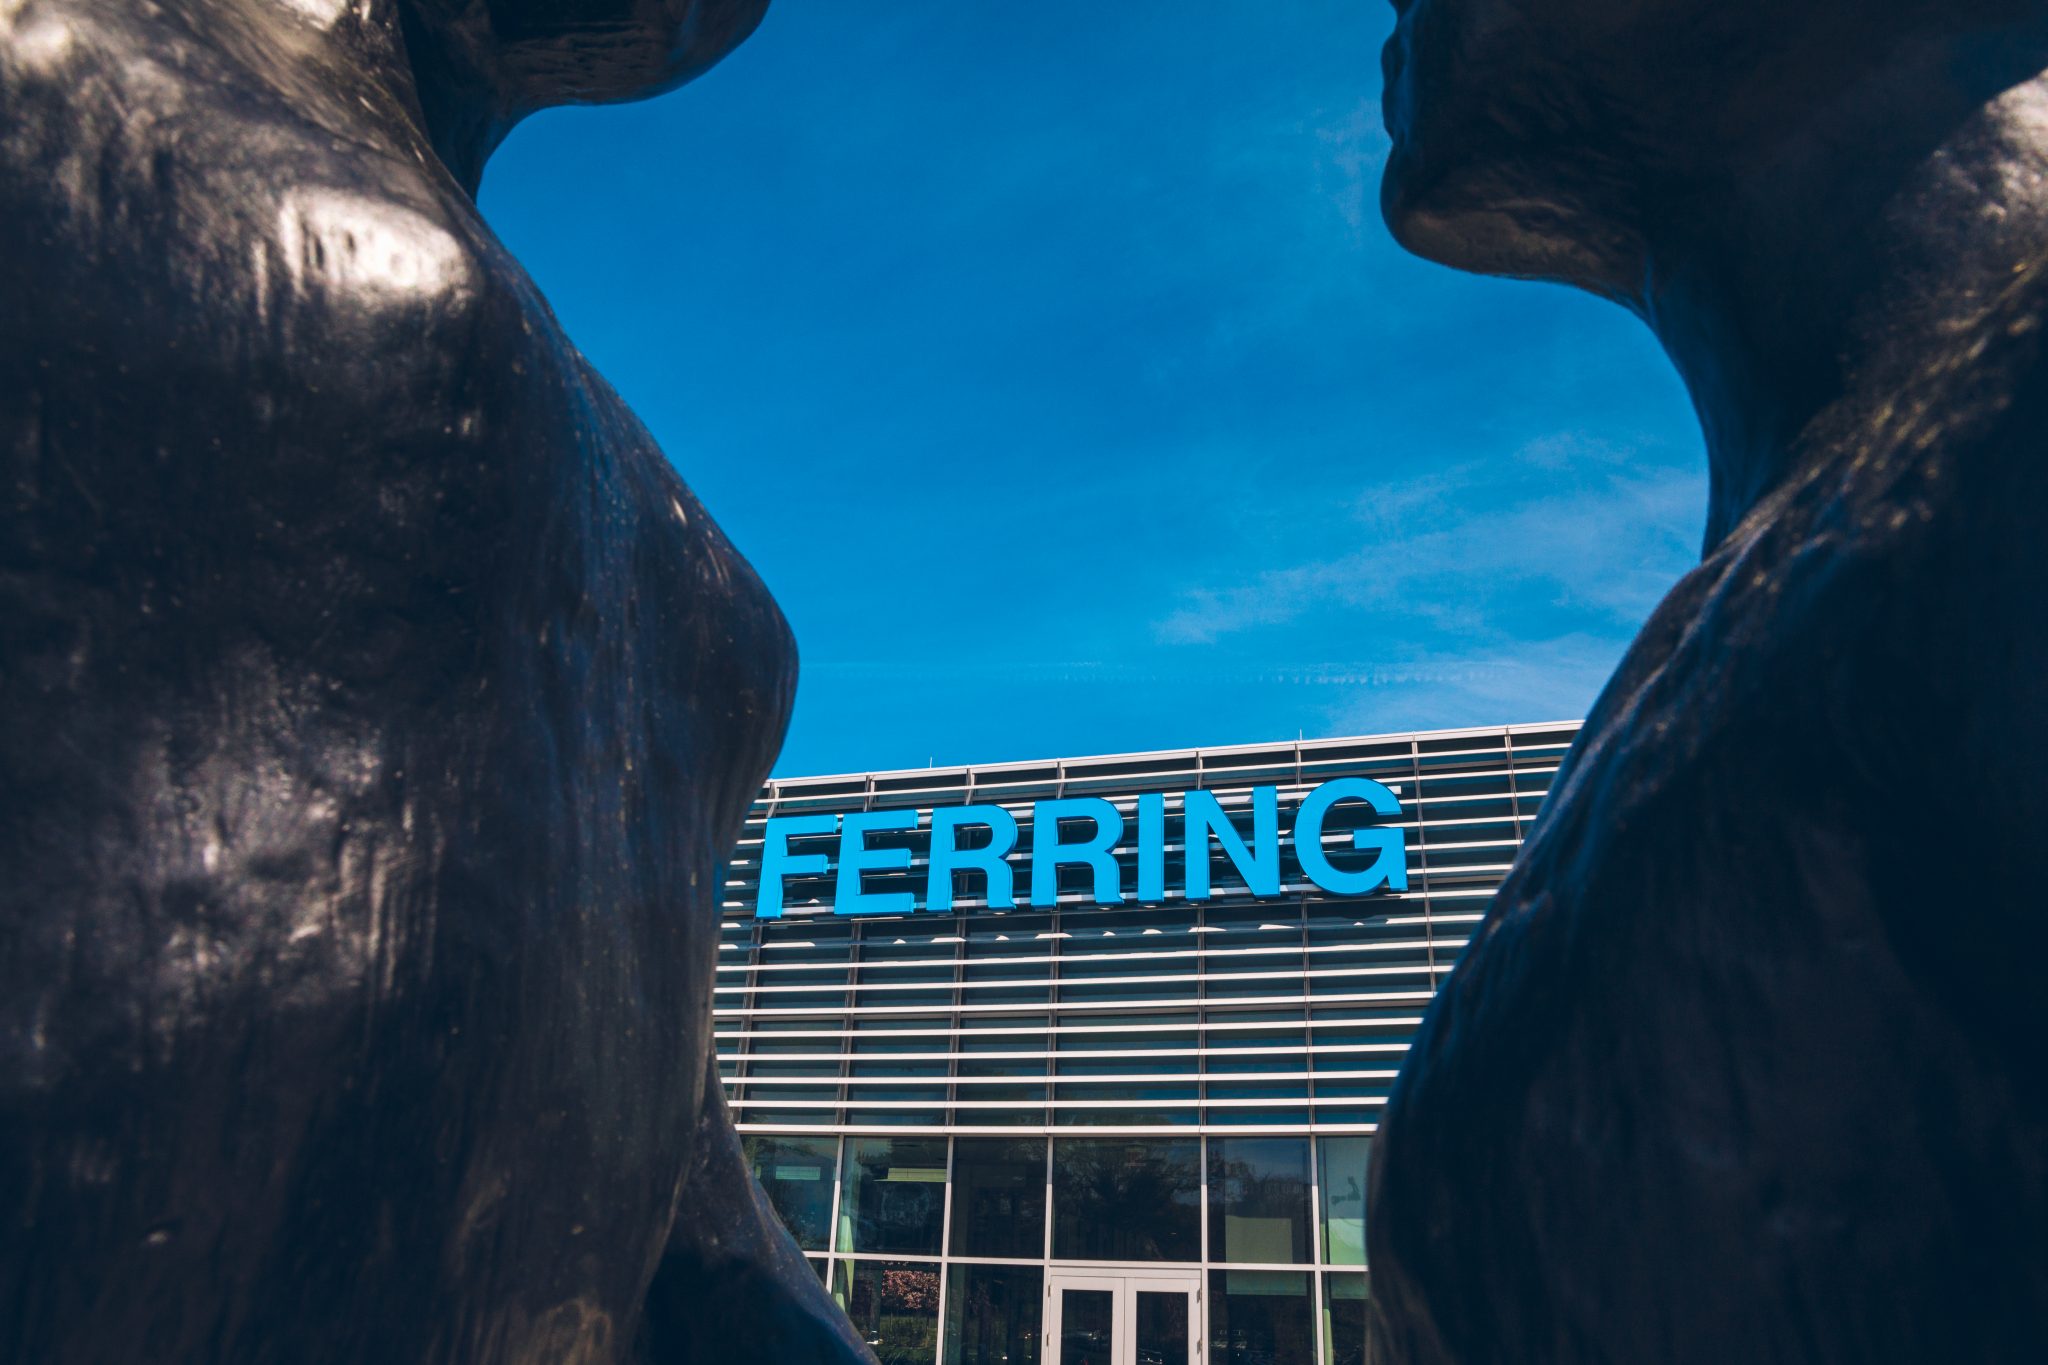 The Ferring logo on a building as seen from a distance framed between two statues in the foreground